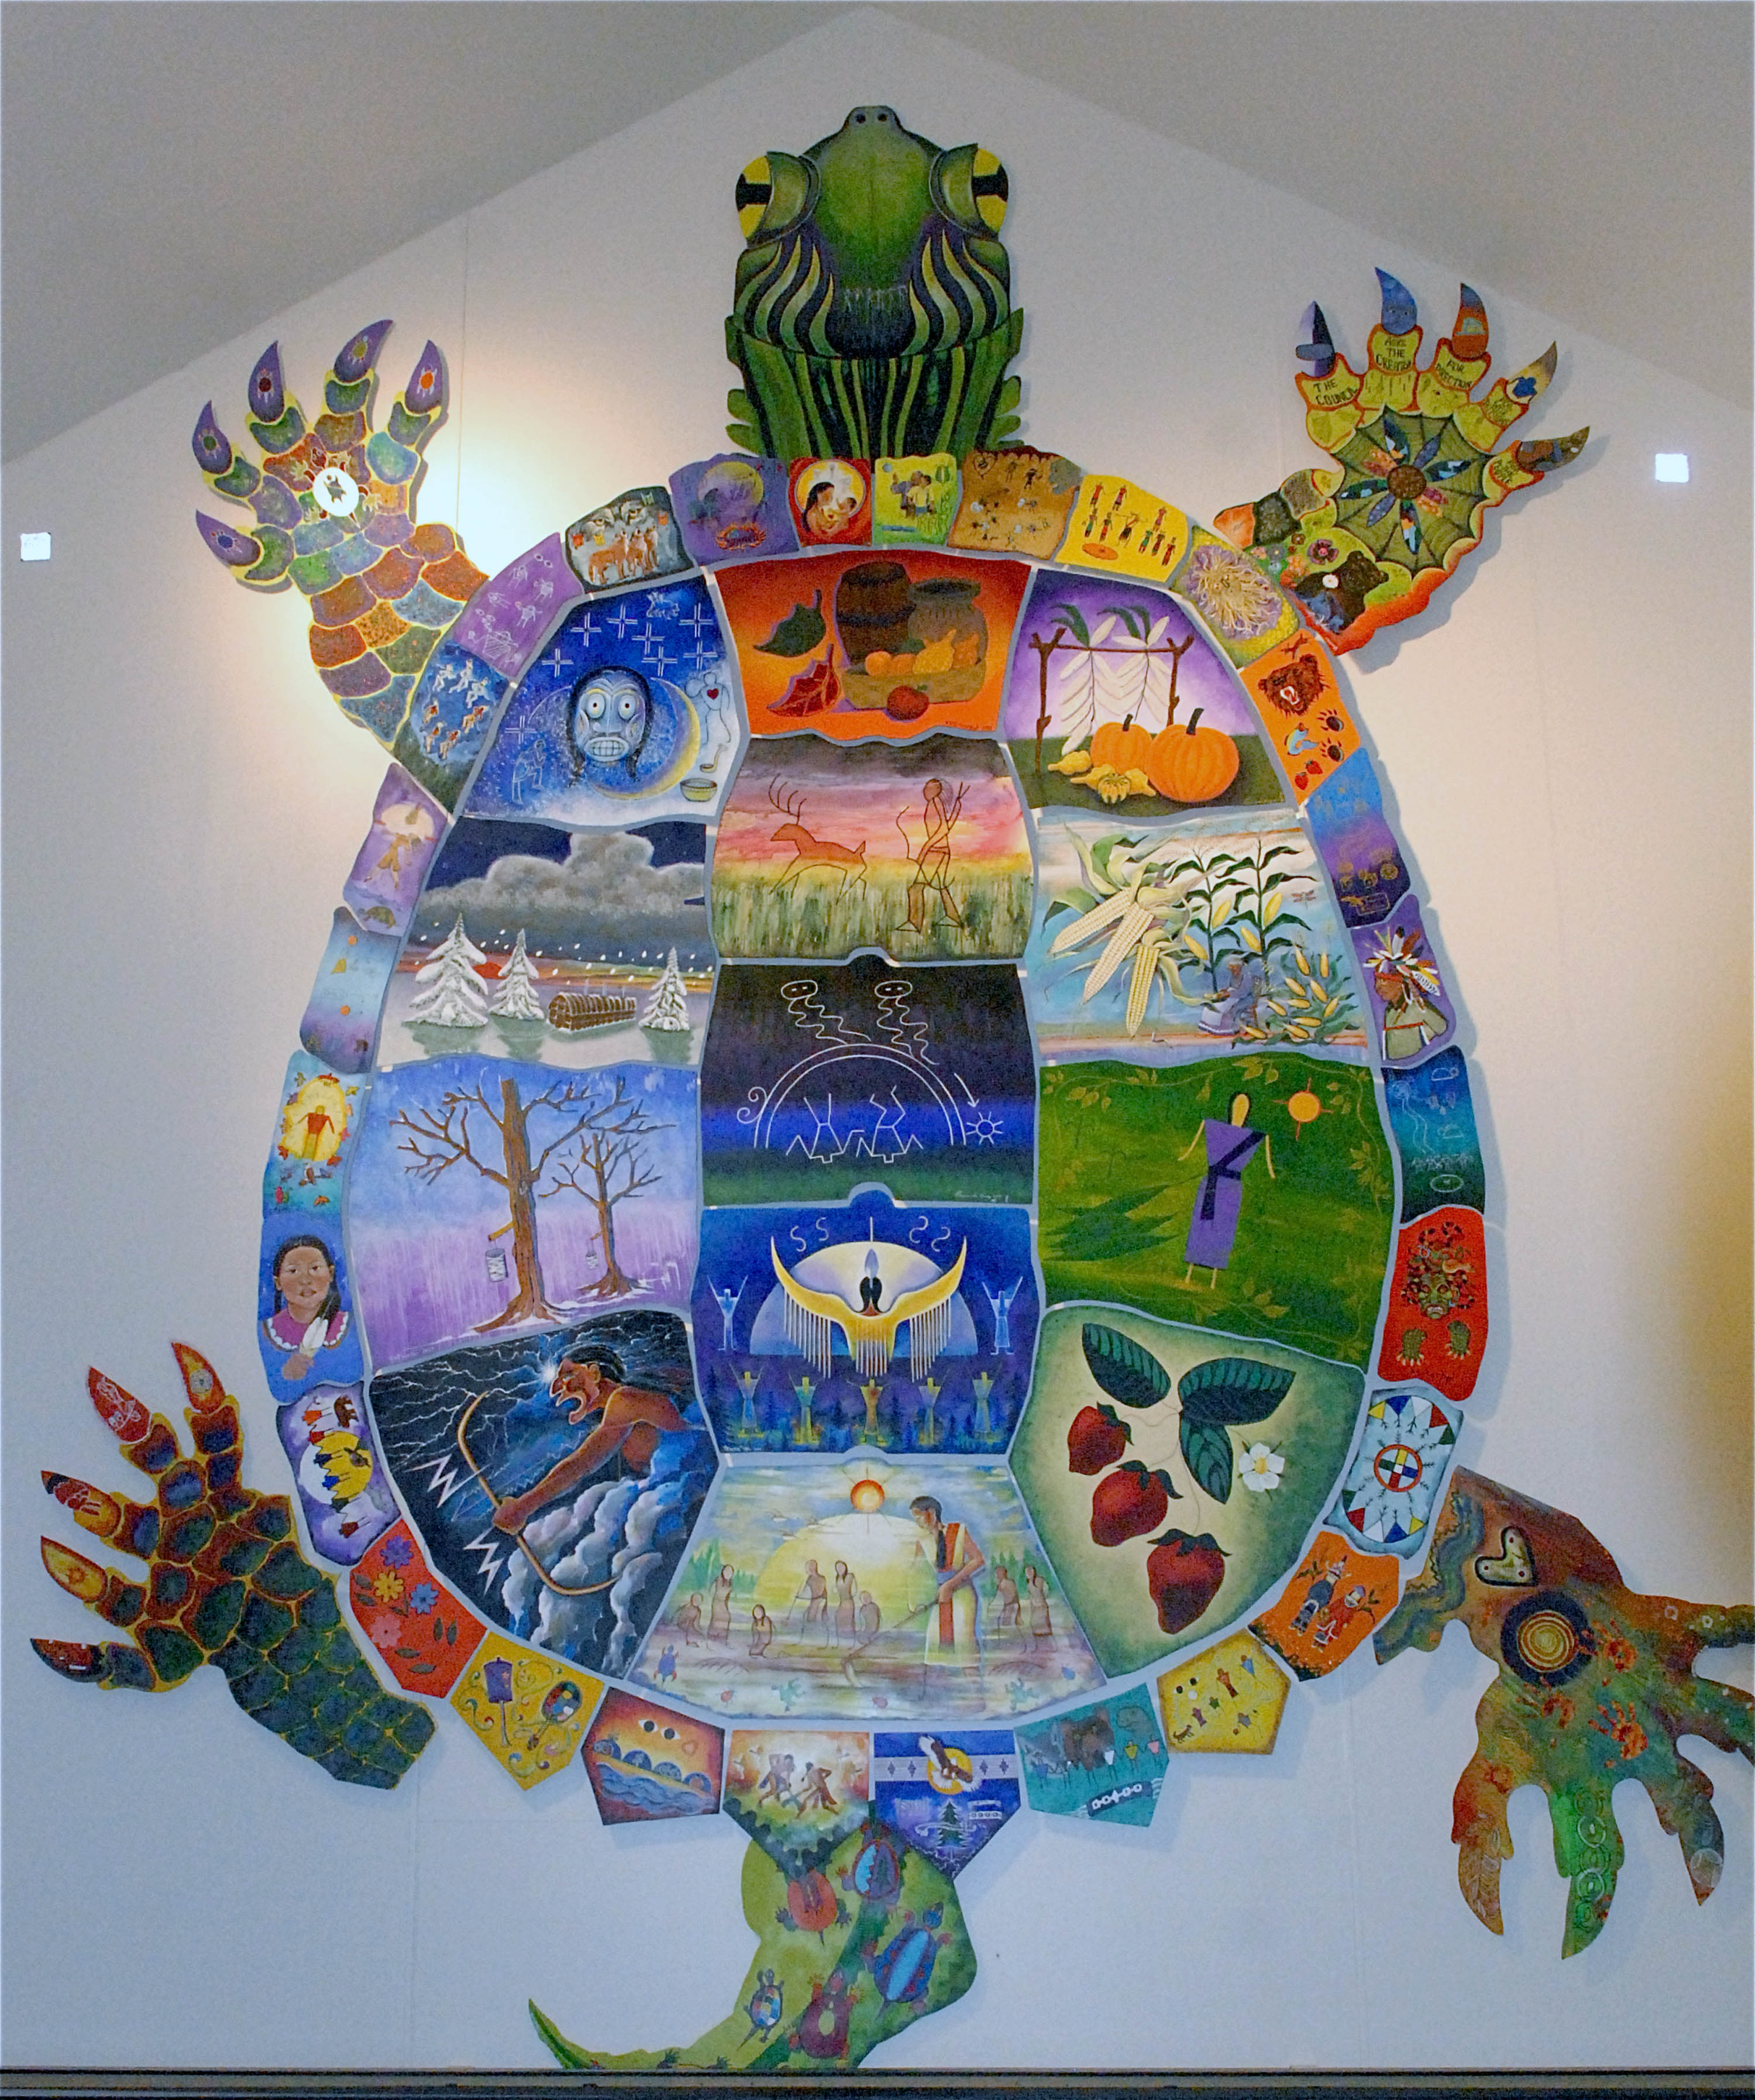 A turtle painted by local tribe members displays the Oneida Nation's circle of annual celebrations featuring seasonal food.